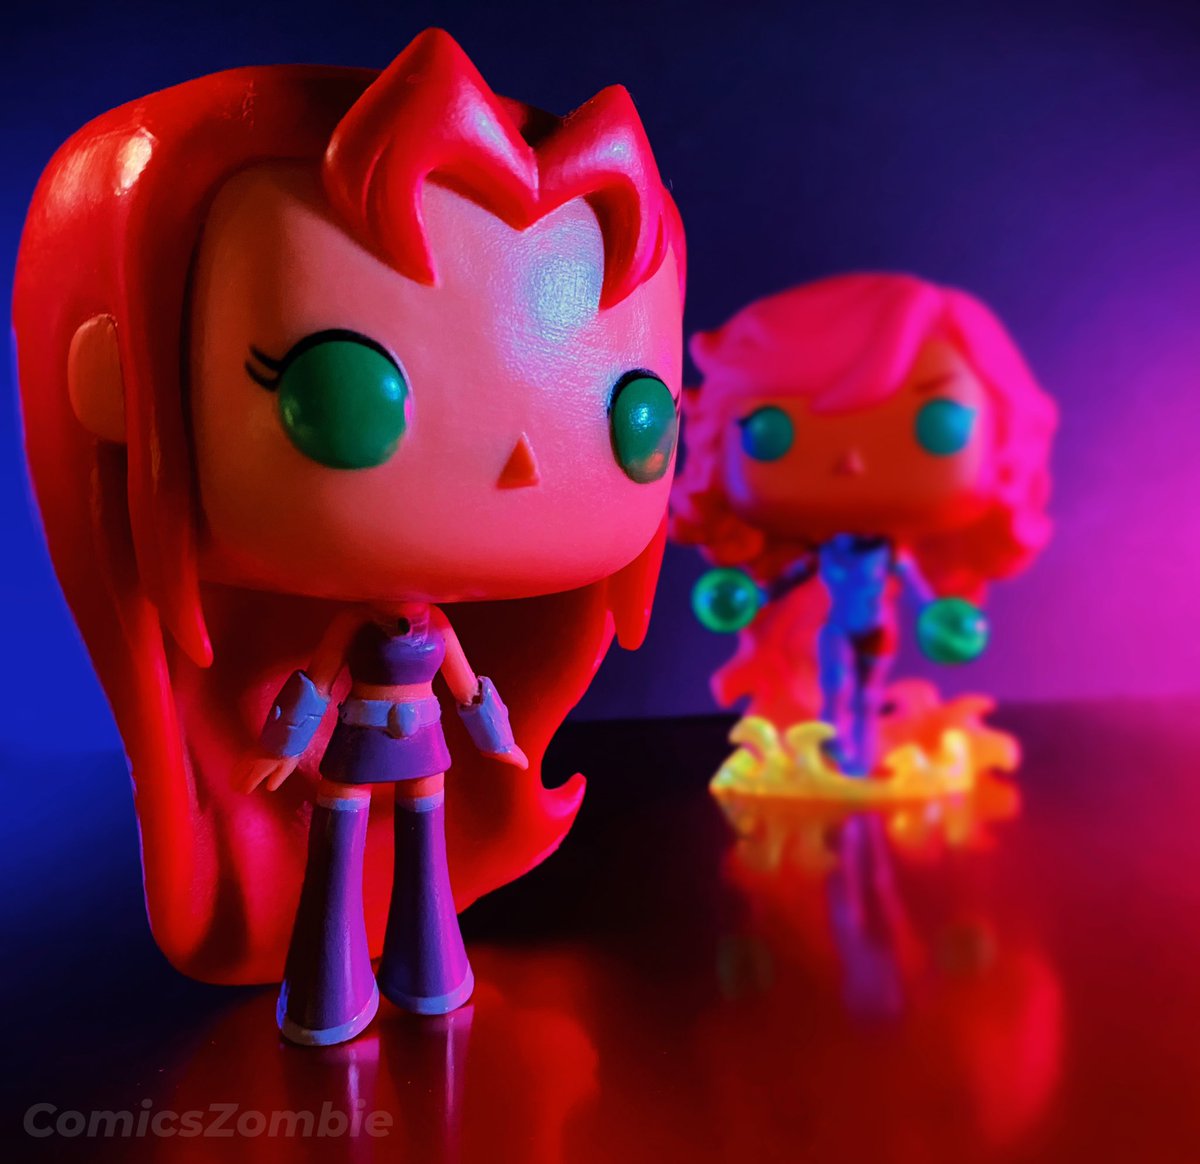 Throwback to one of my early Funko Pops and one of my most recent! How cool is that! #funkophotoadaychallenge #funkotbt #teentitansgo #teentitans #sdccexclusive #starfire @originalfunko @dccomcis @TeenTitansMovie #fotw